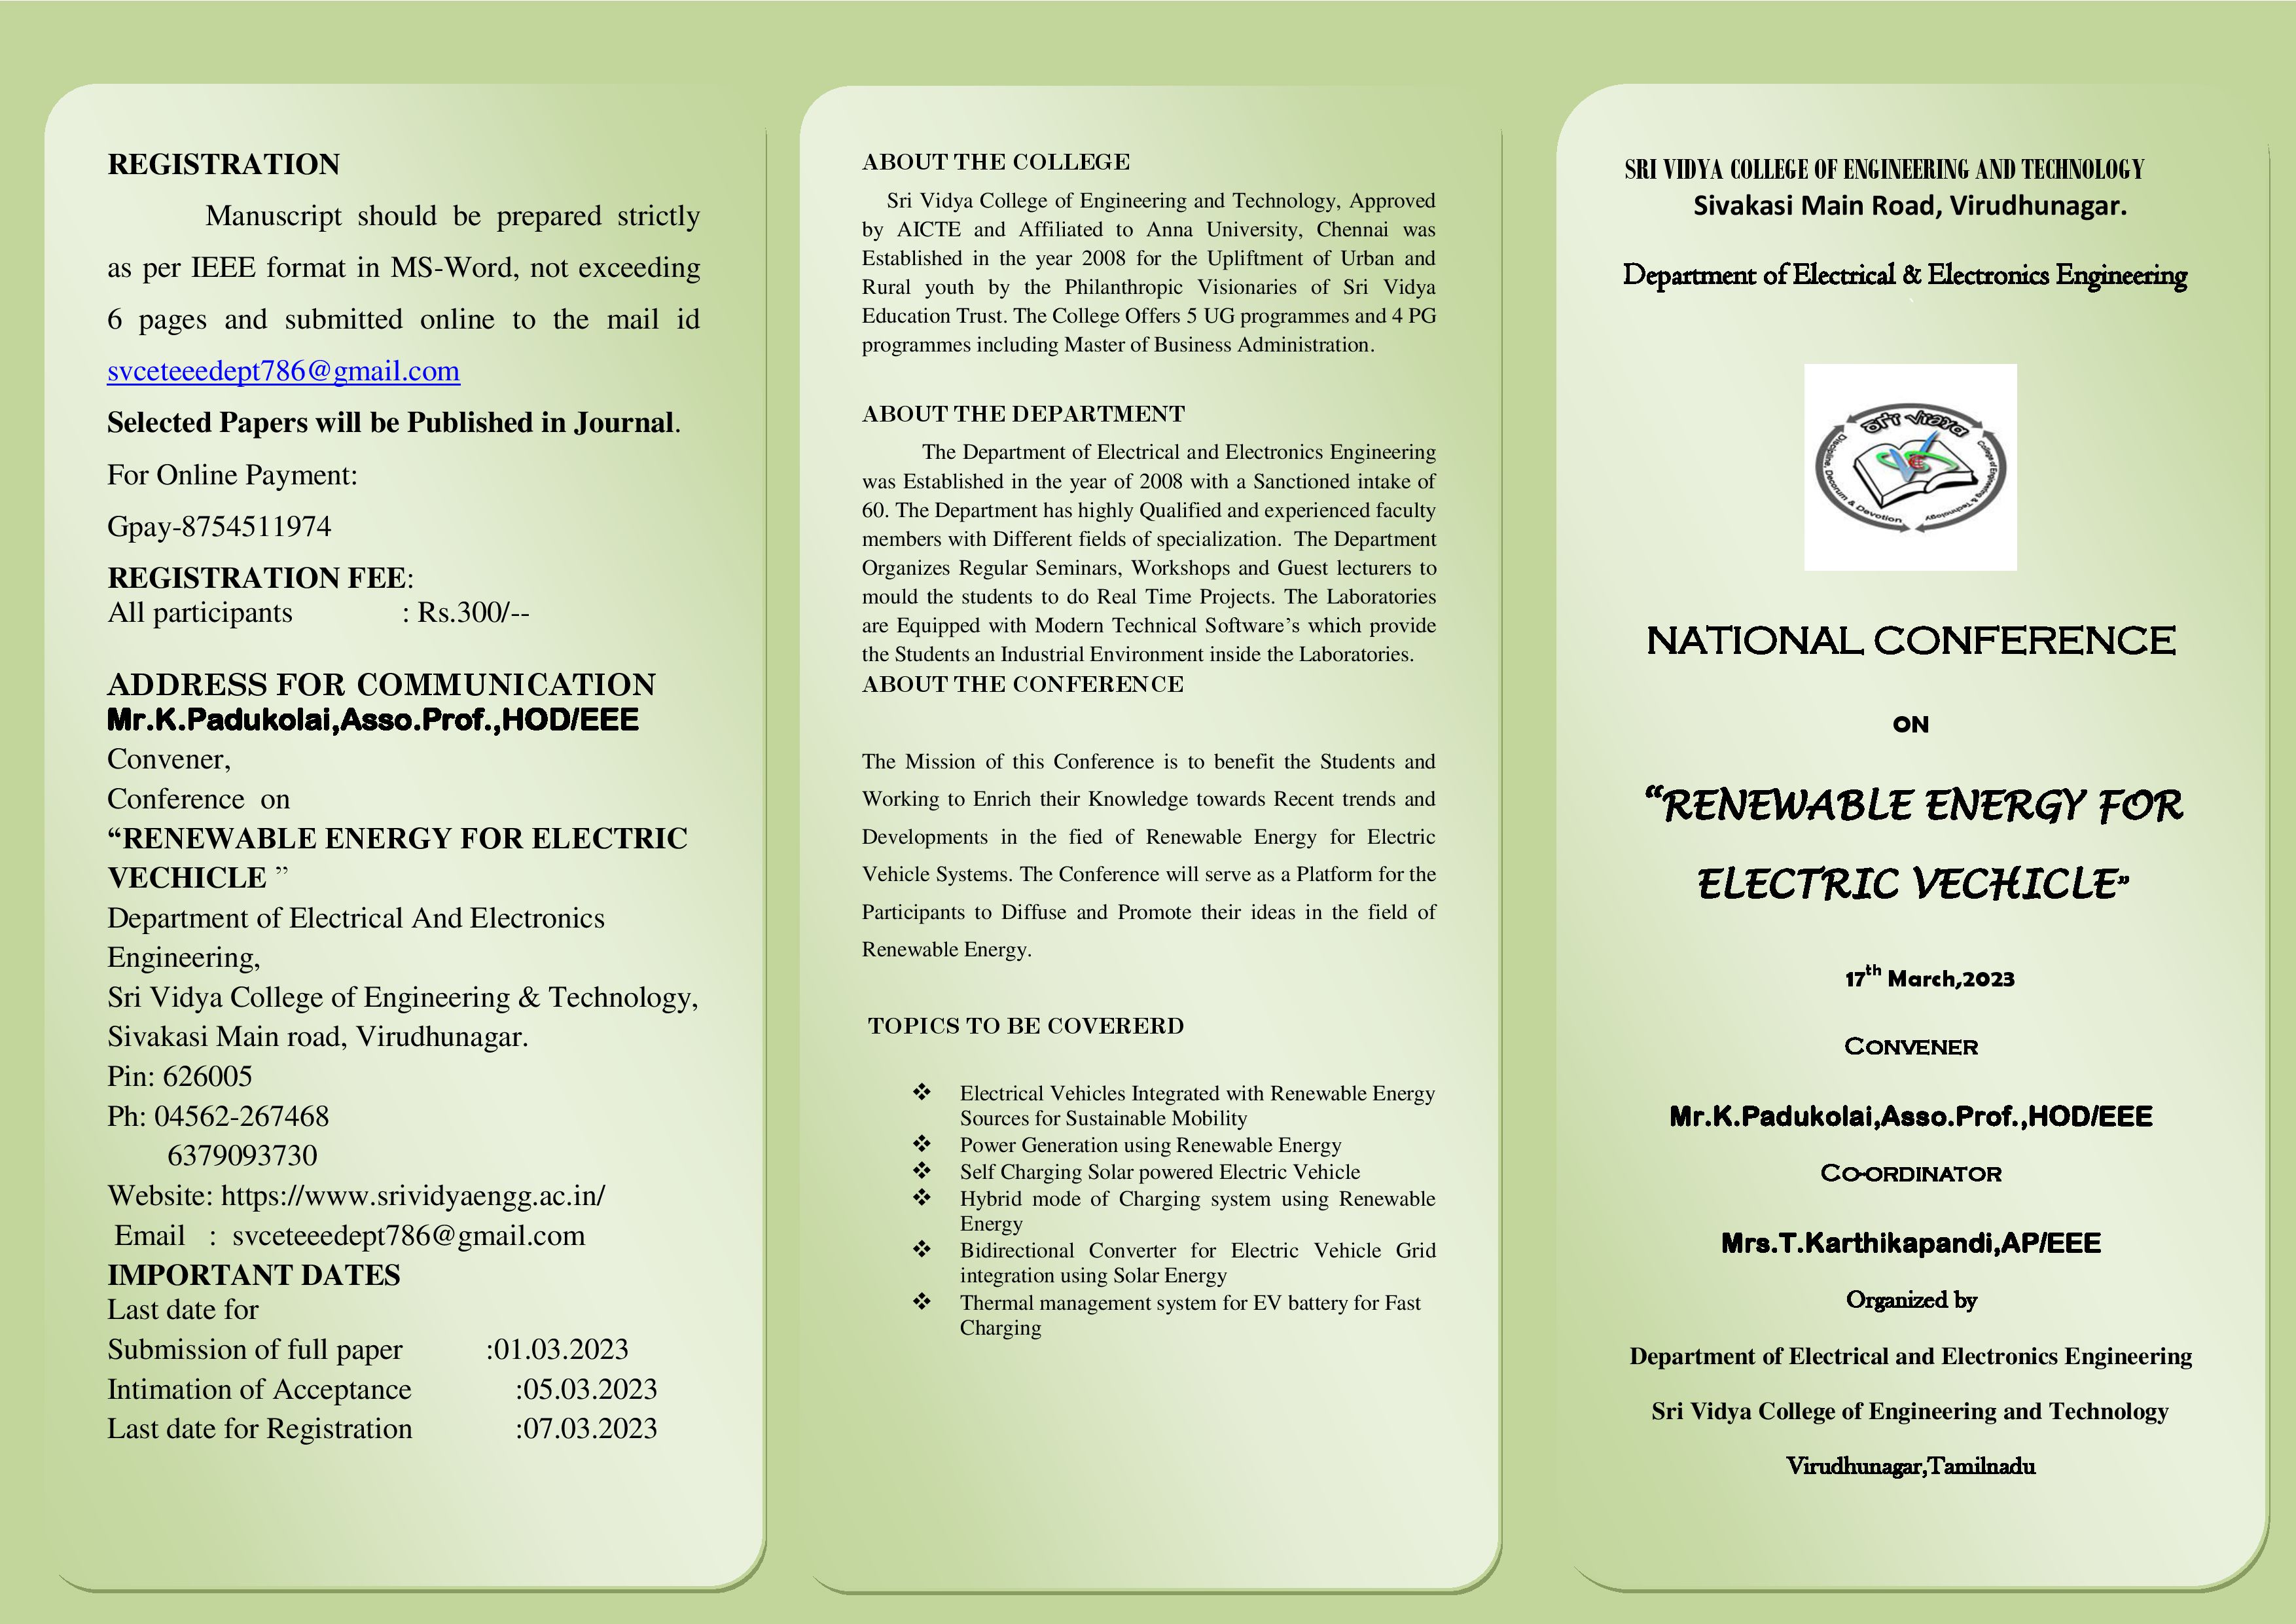 National Conference on Renewable Energy for Electric Vehicle 2023